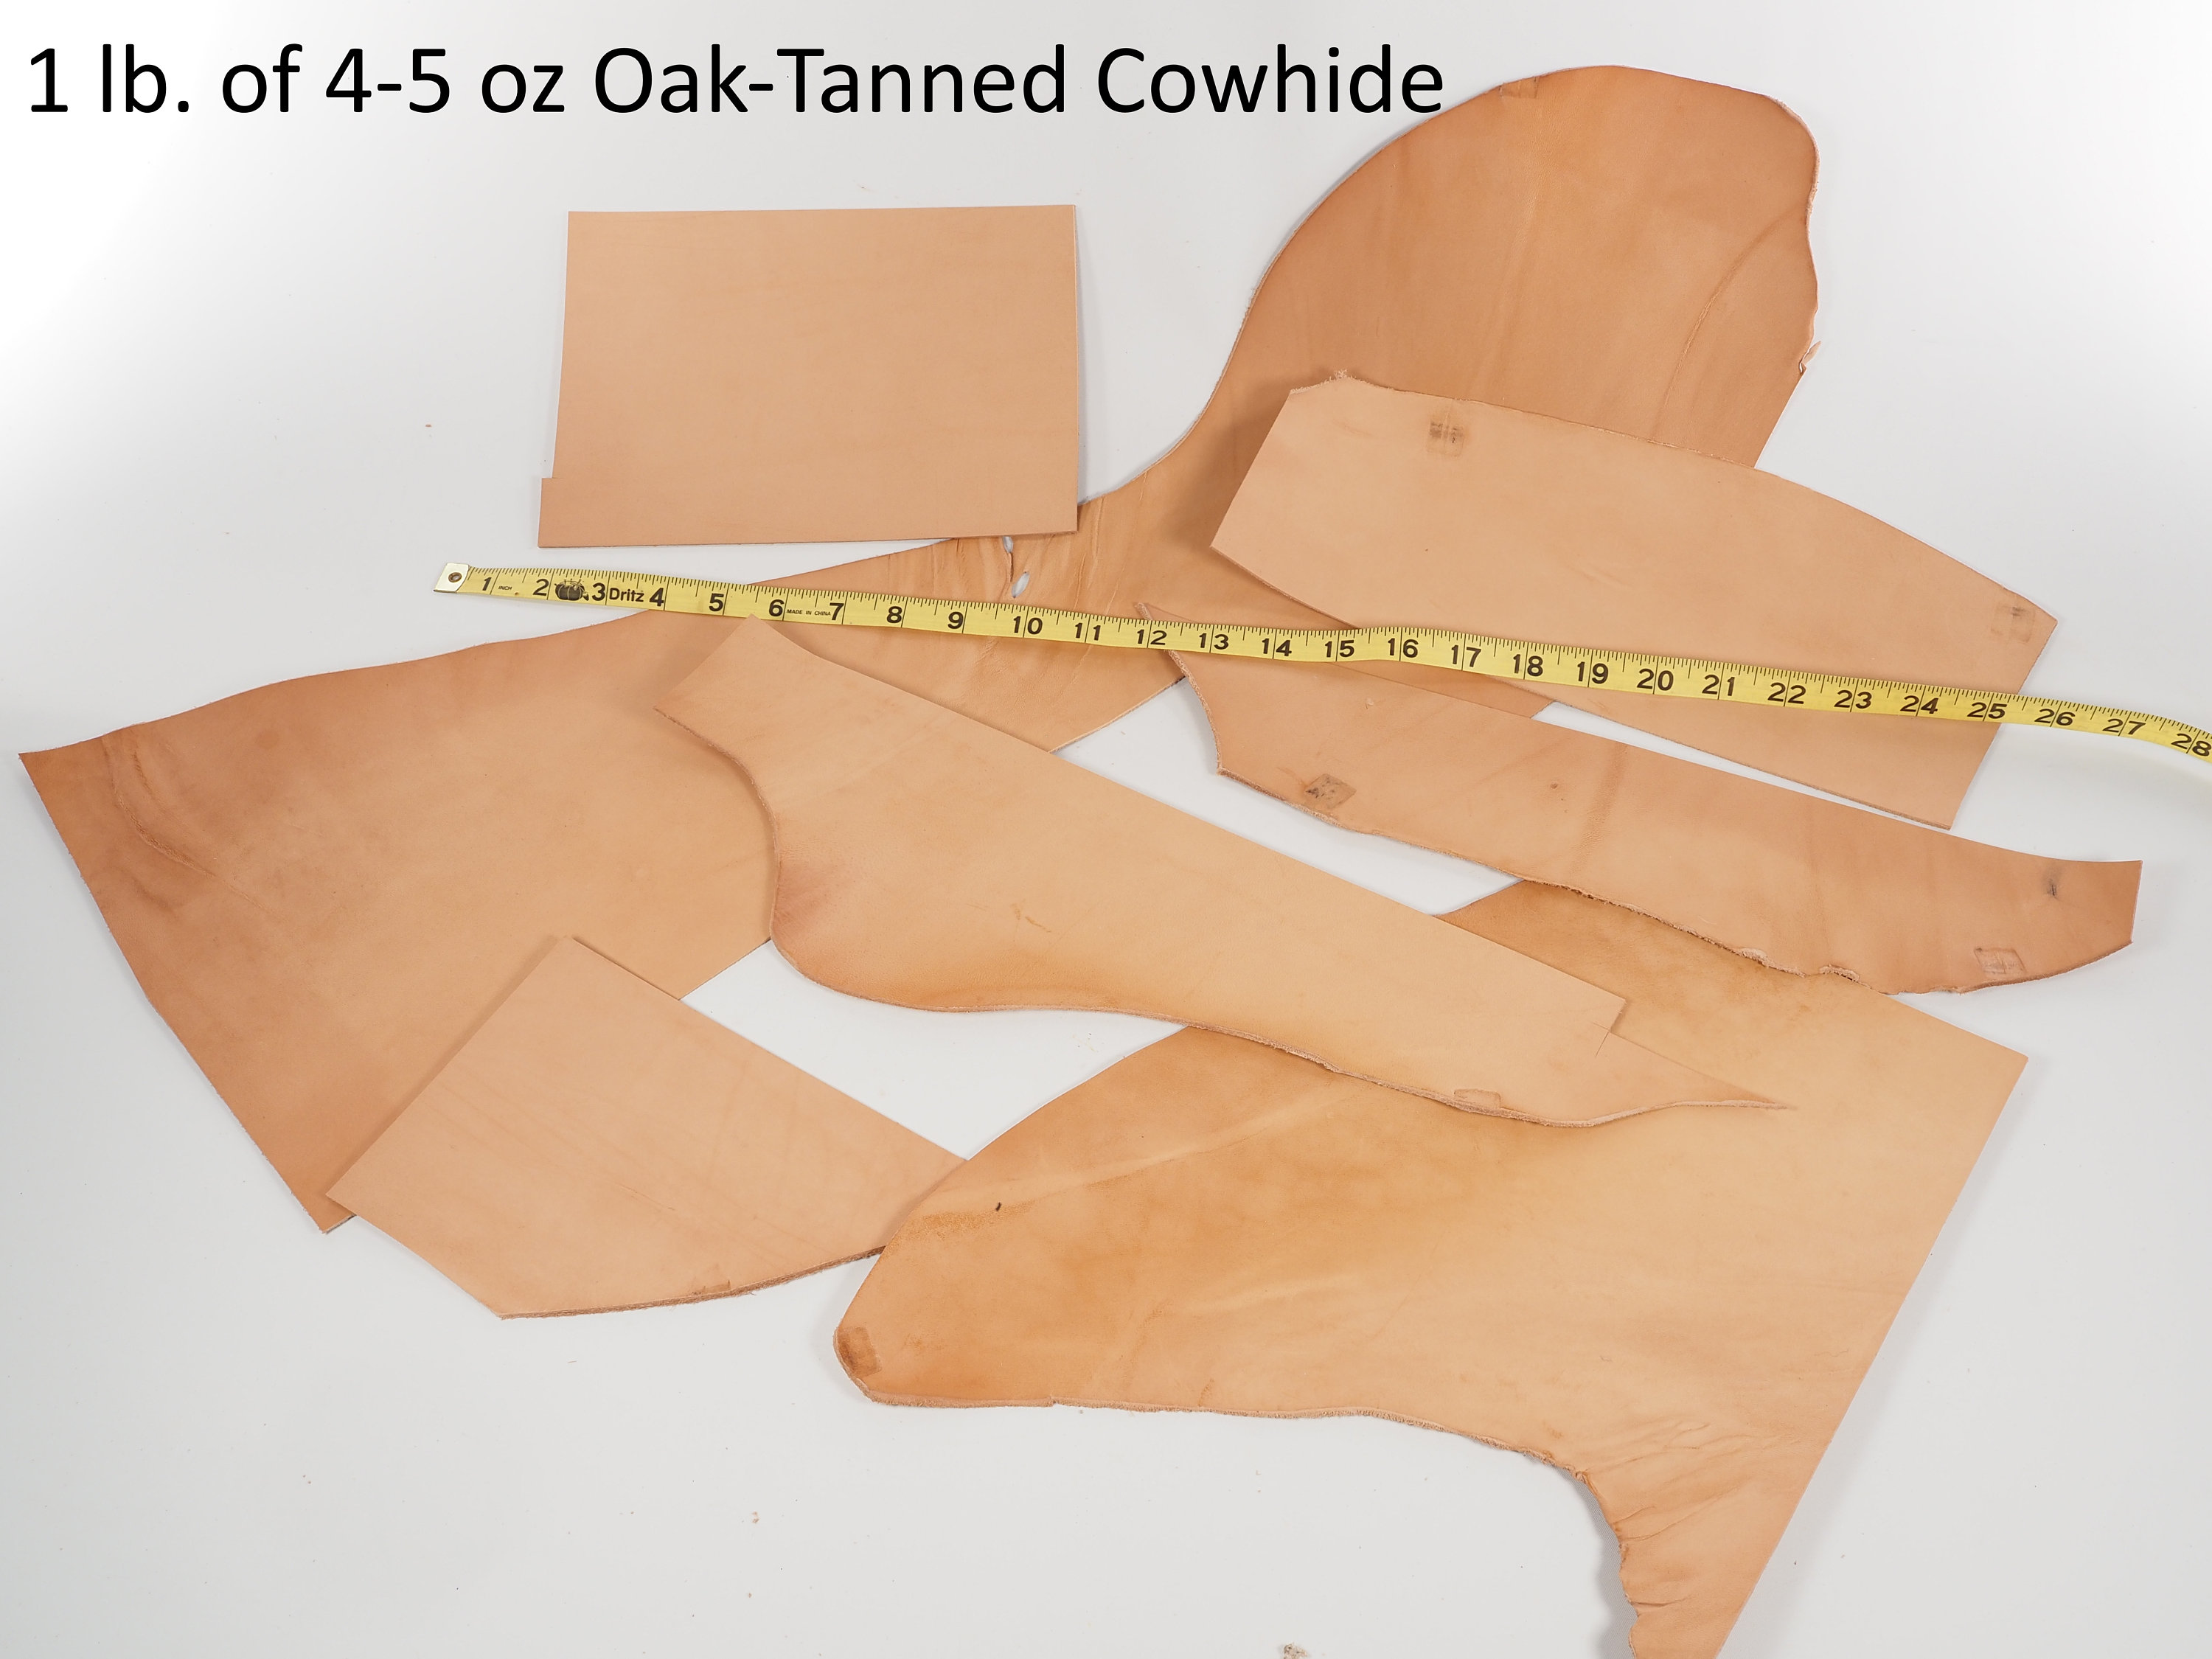 Two Pounds Veg Tan Leather Scrap, 2 lbs Vegetable Tanned Scrap Leather  Pieces for Crafting, Heavy Weight Thick 8-9 oz Mixed with 6-7 oz and 7-8 oz  Veg-Tan Tooling Leather Remnants